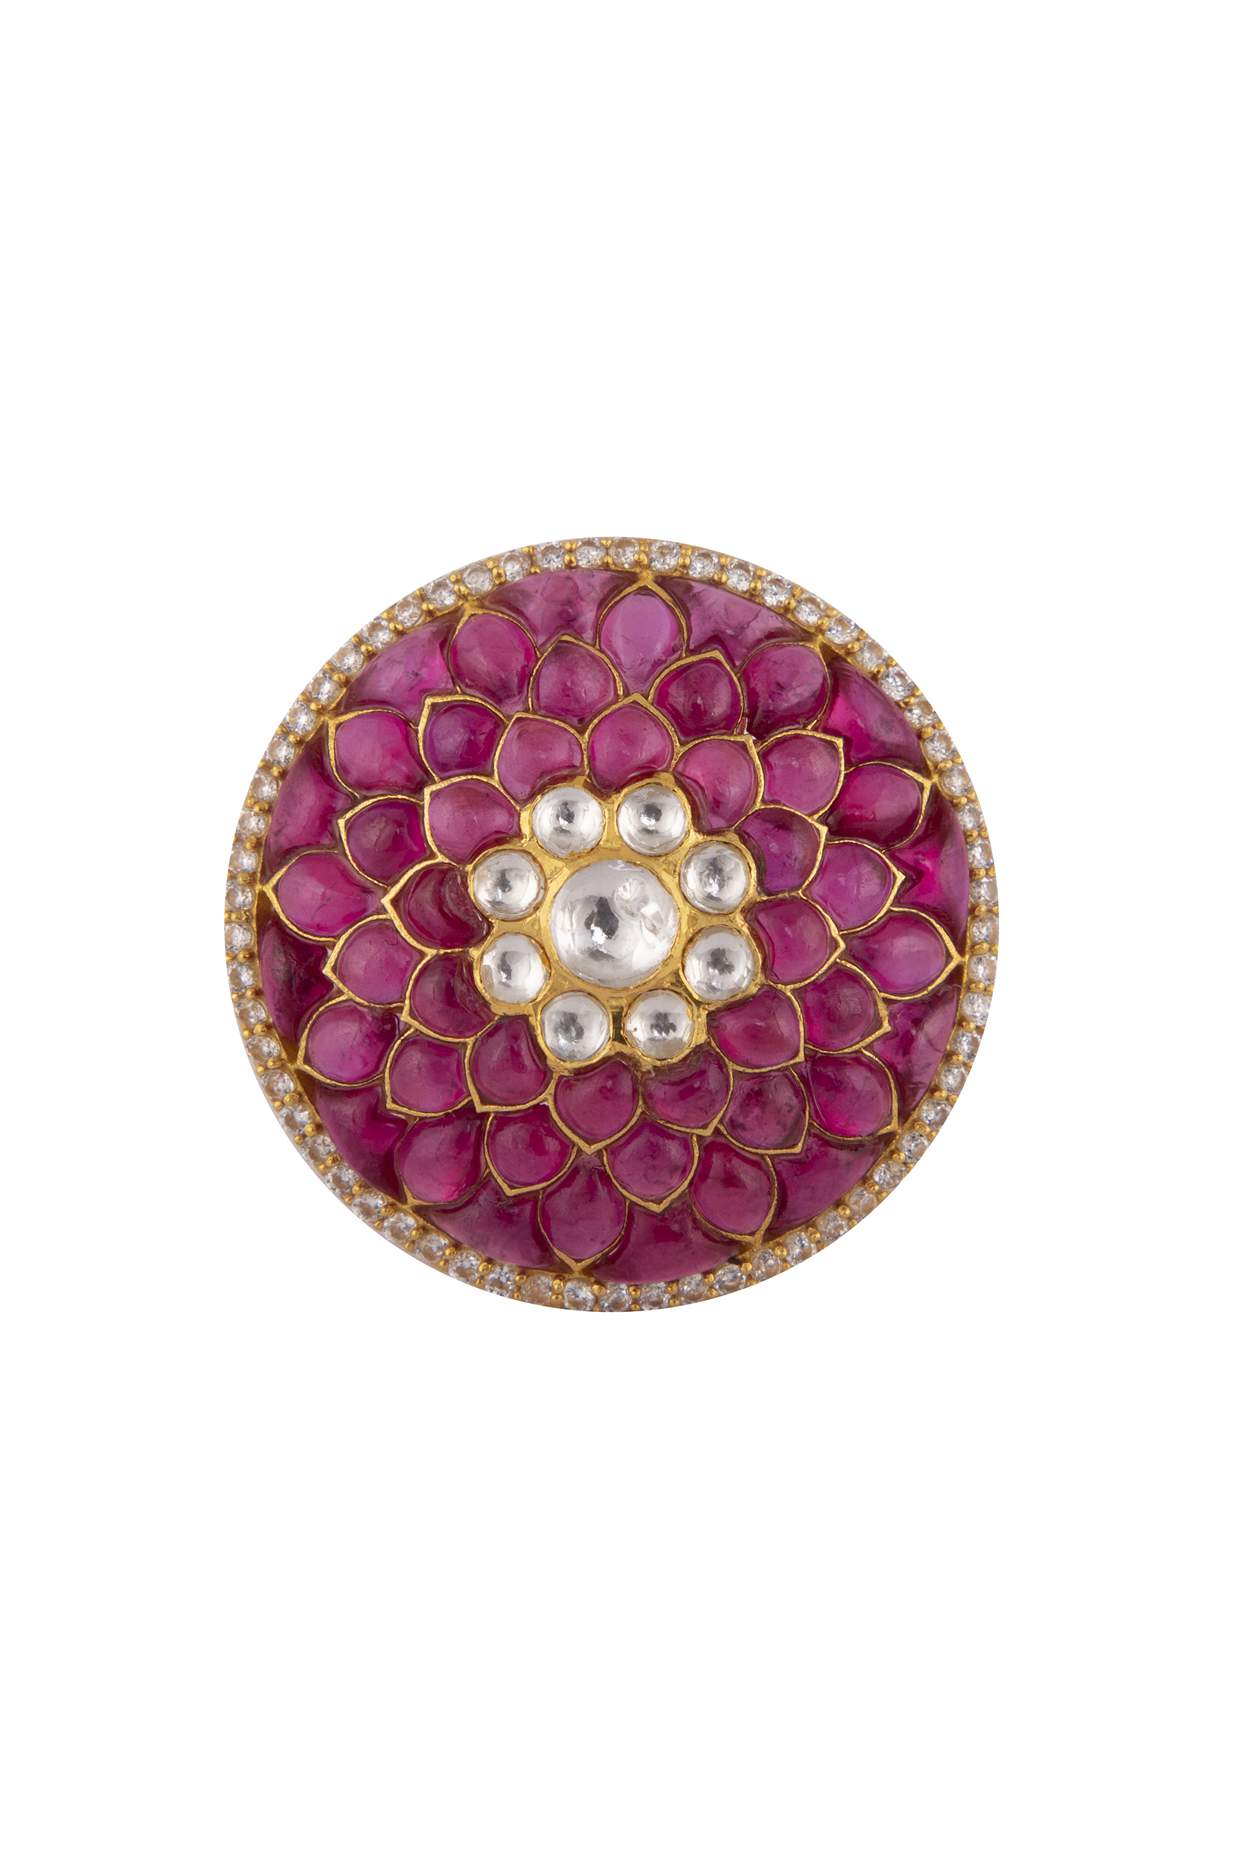 Gold Plated Silver Floral Ring - Amrrutam